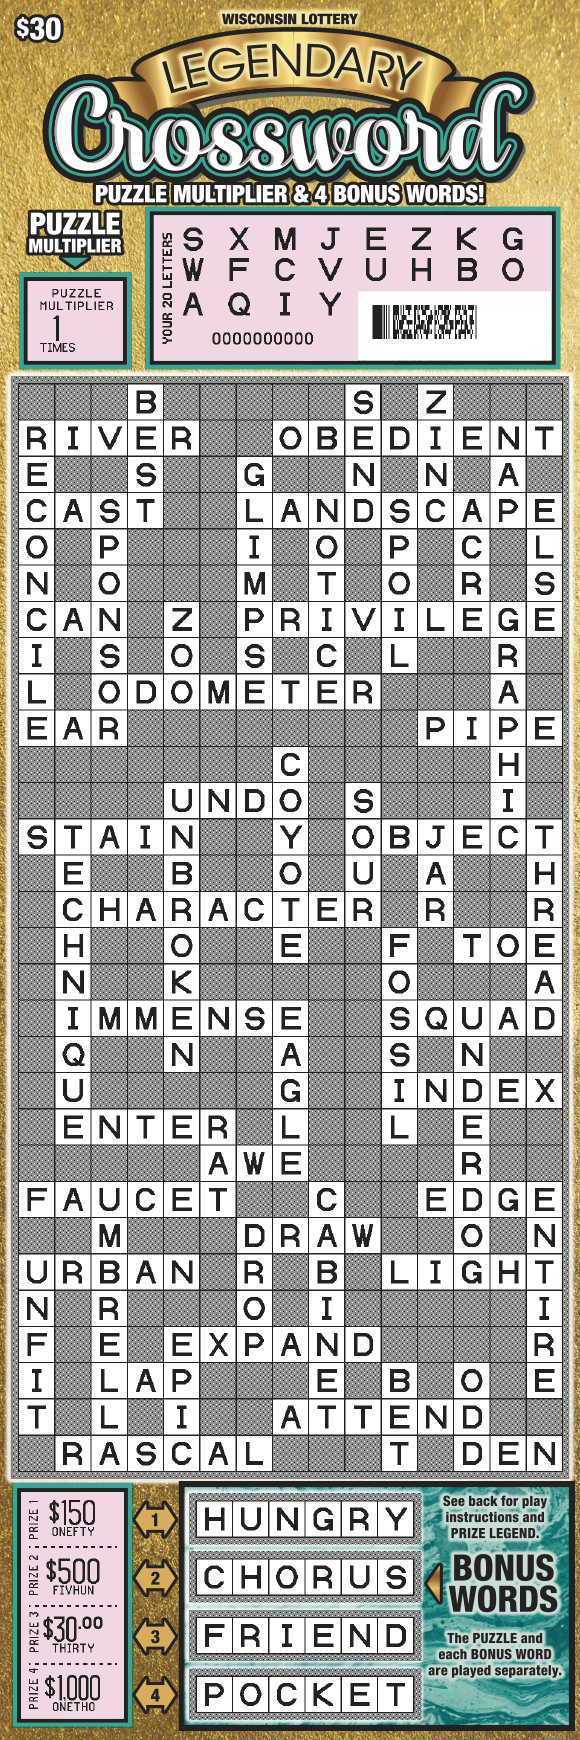 gold banner with black block text and white scripted lettering outlined in teal above white scratched extra tall teal crossword puzzle play areaon scratch game